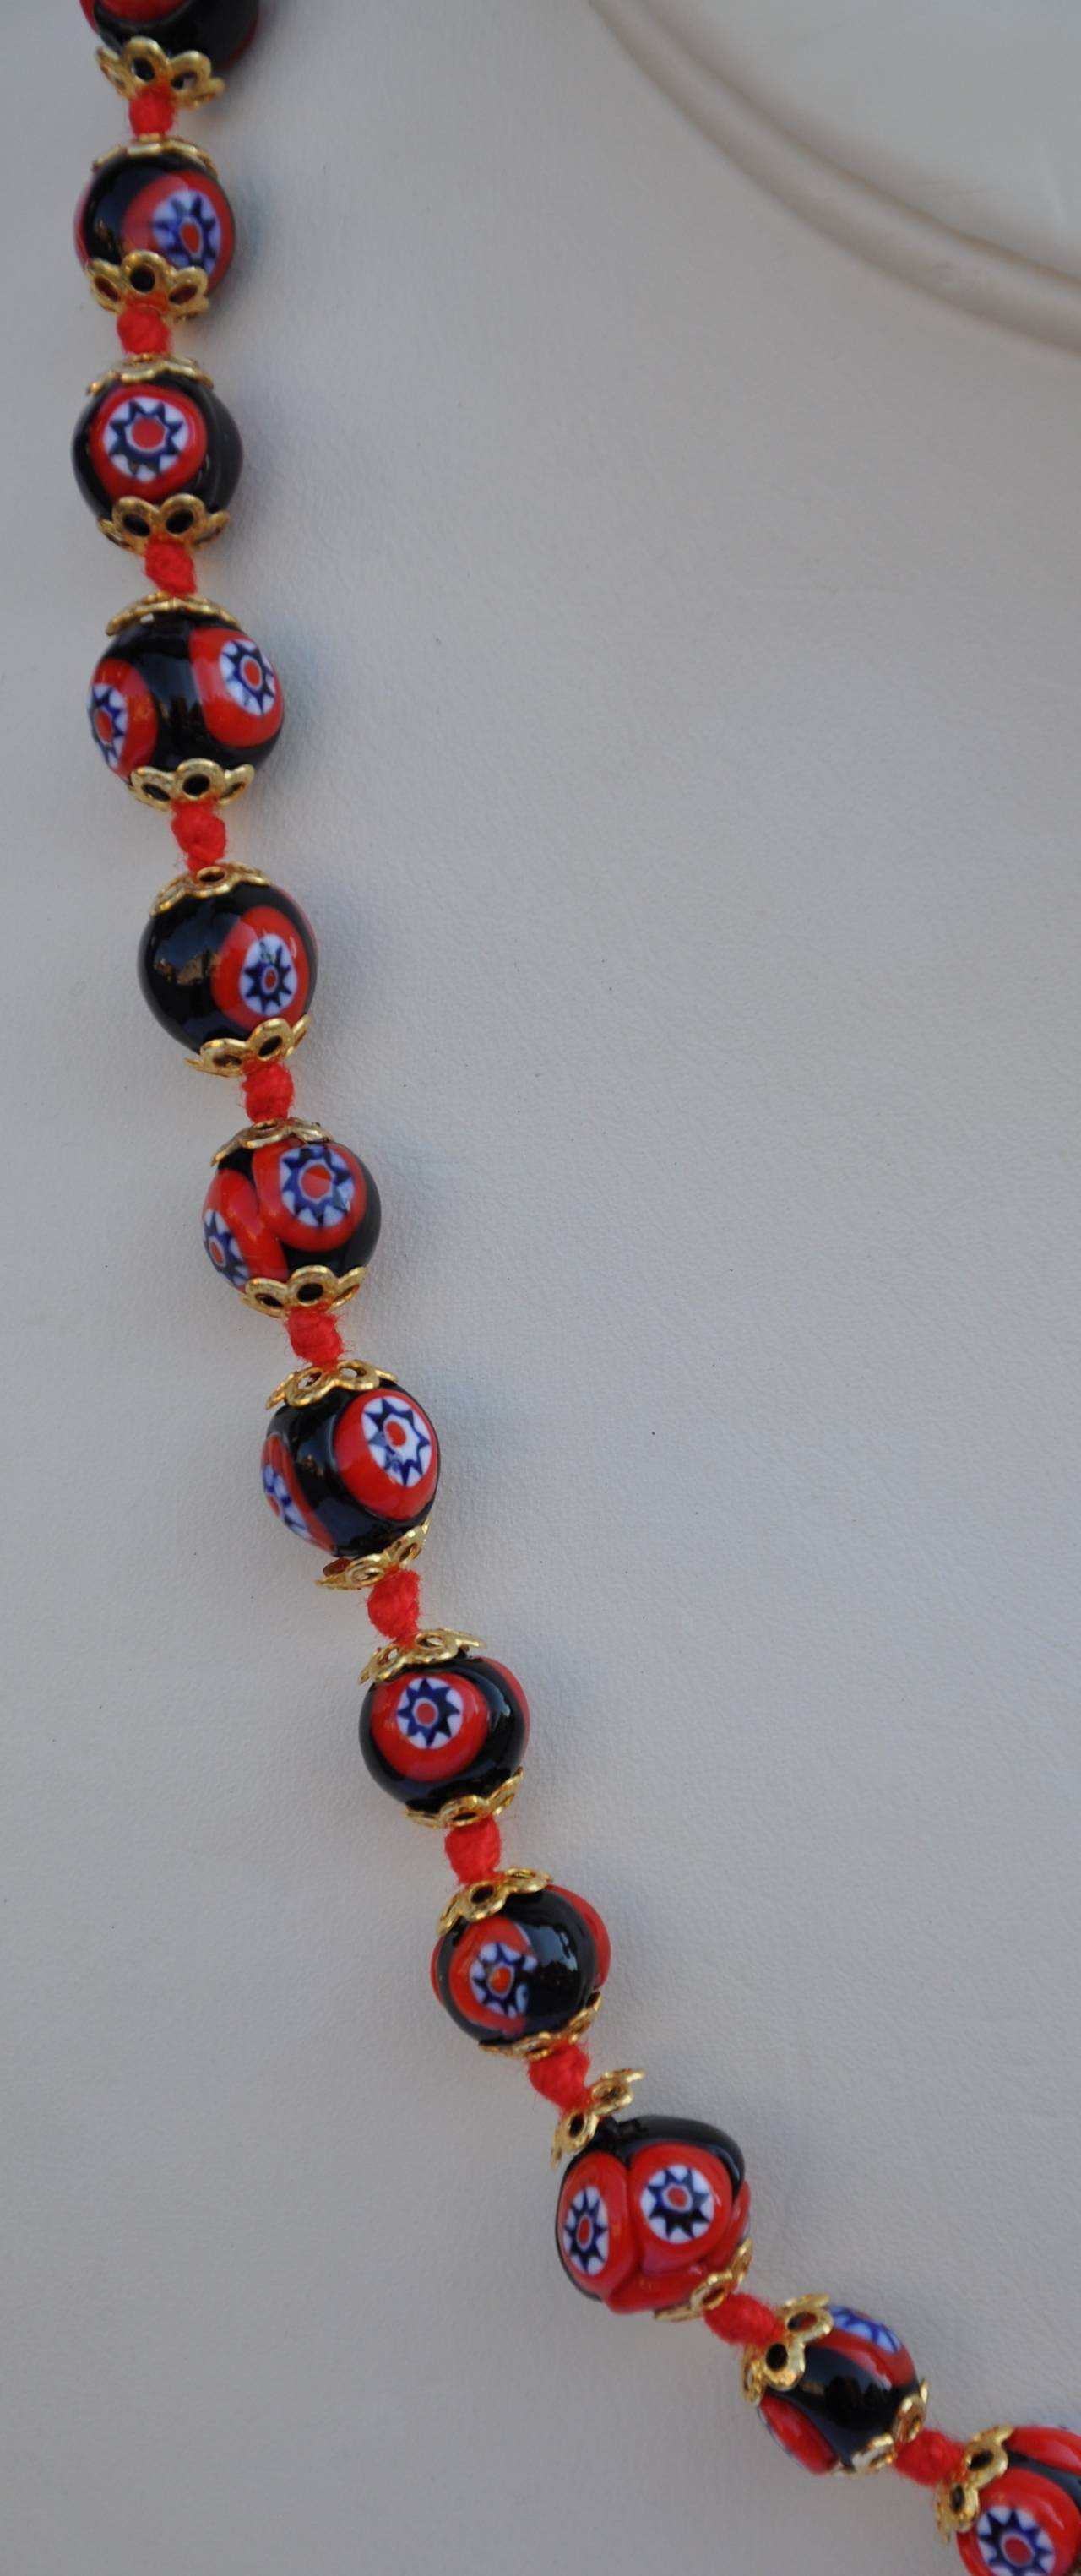 Multi-colors blended with navy, red and white in each glass carved beads makes for a lovely necklace. The necklace measures 19" in length with a circumference up to 3/8".